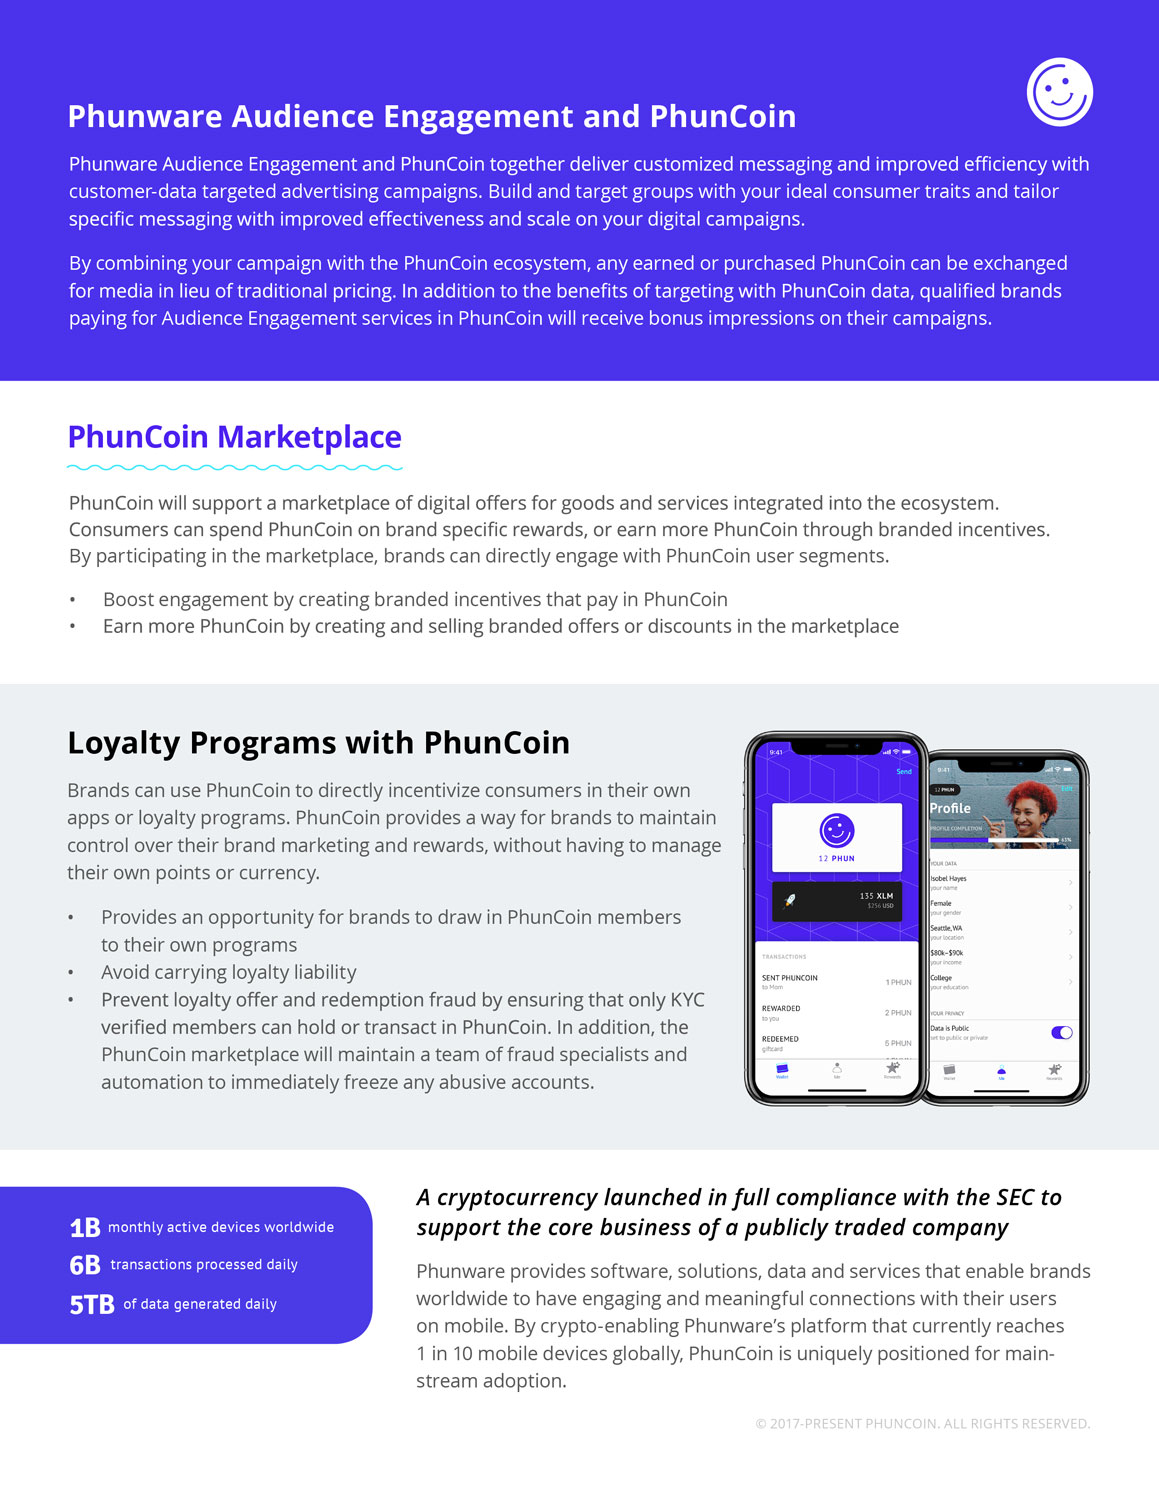 “PhunCoin for Brands” Feature Sheet page 2